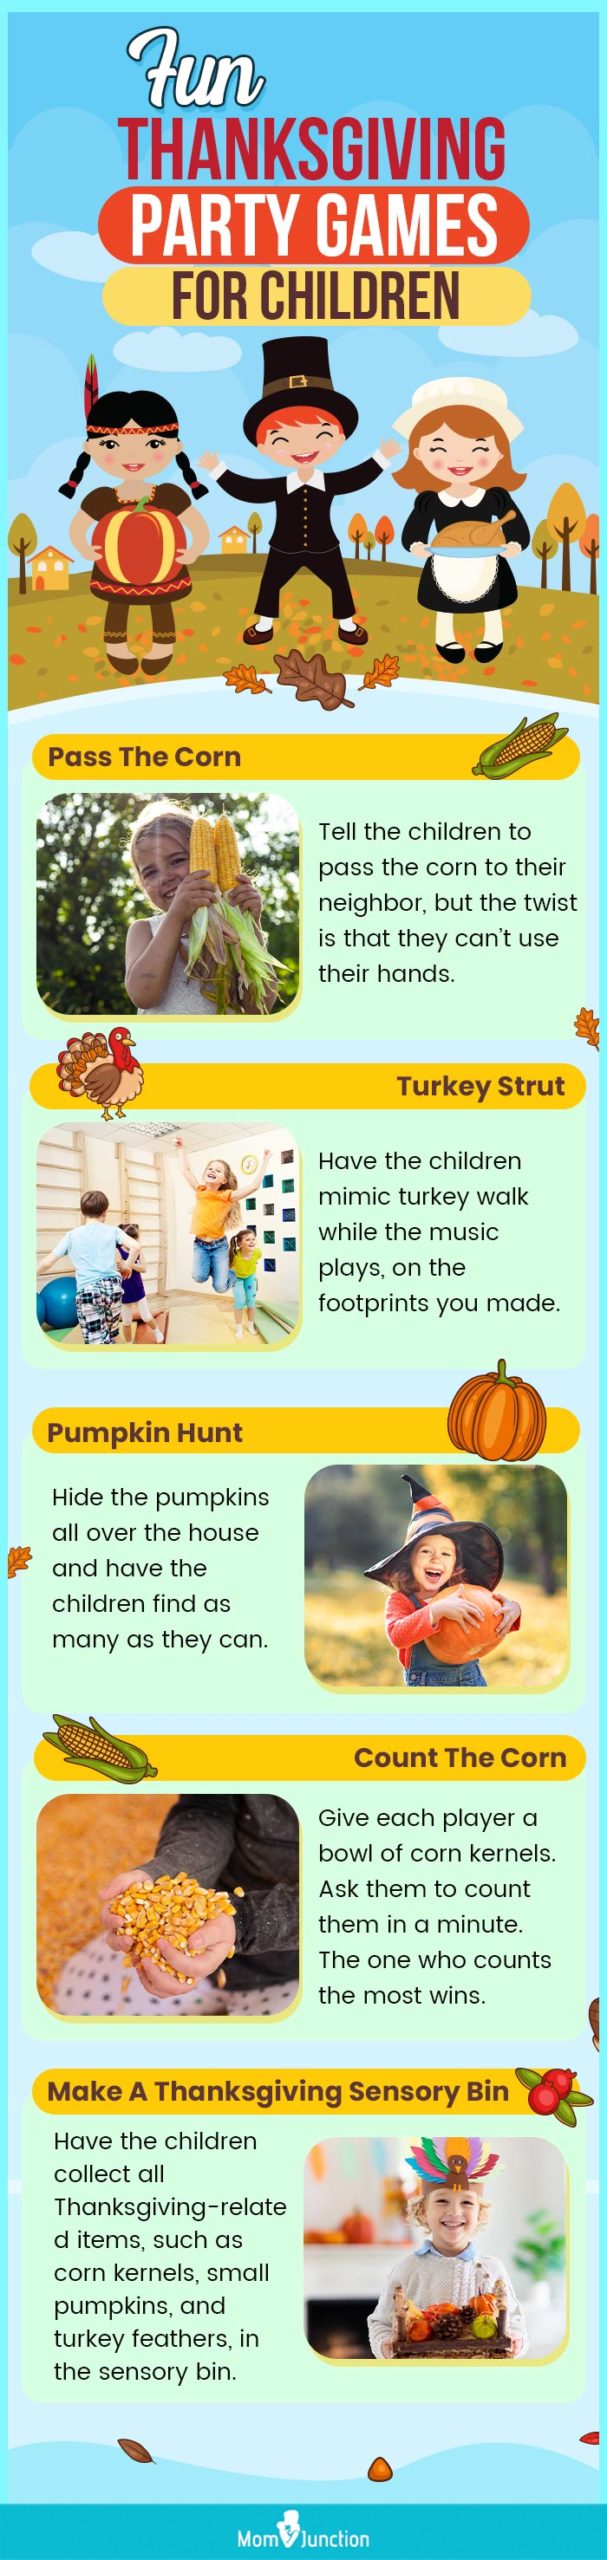 fun thanksgiving party games for children (infographic)